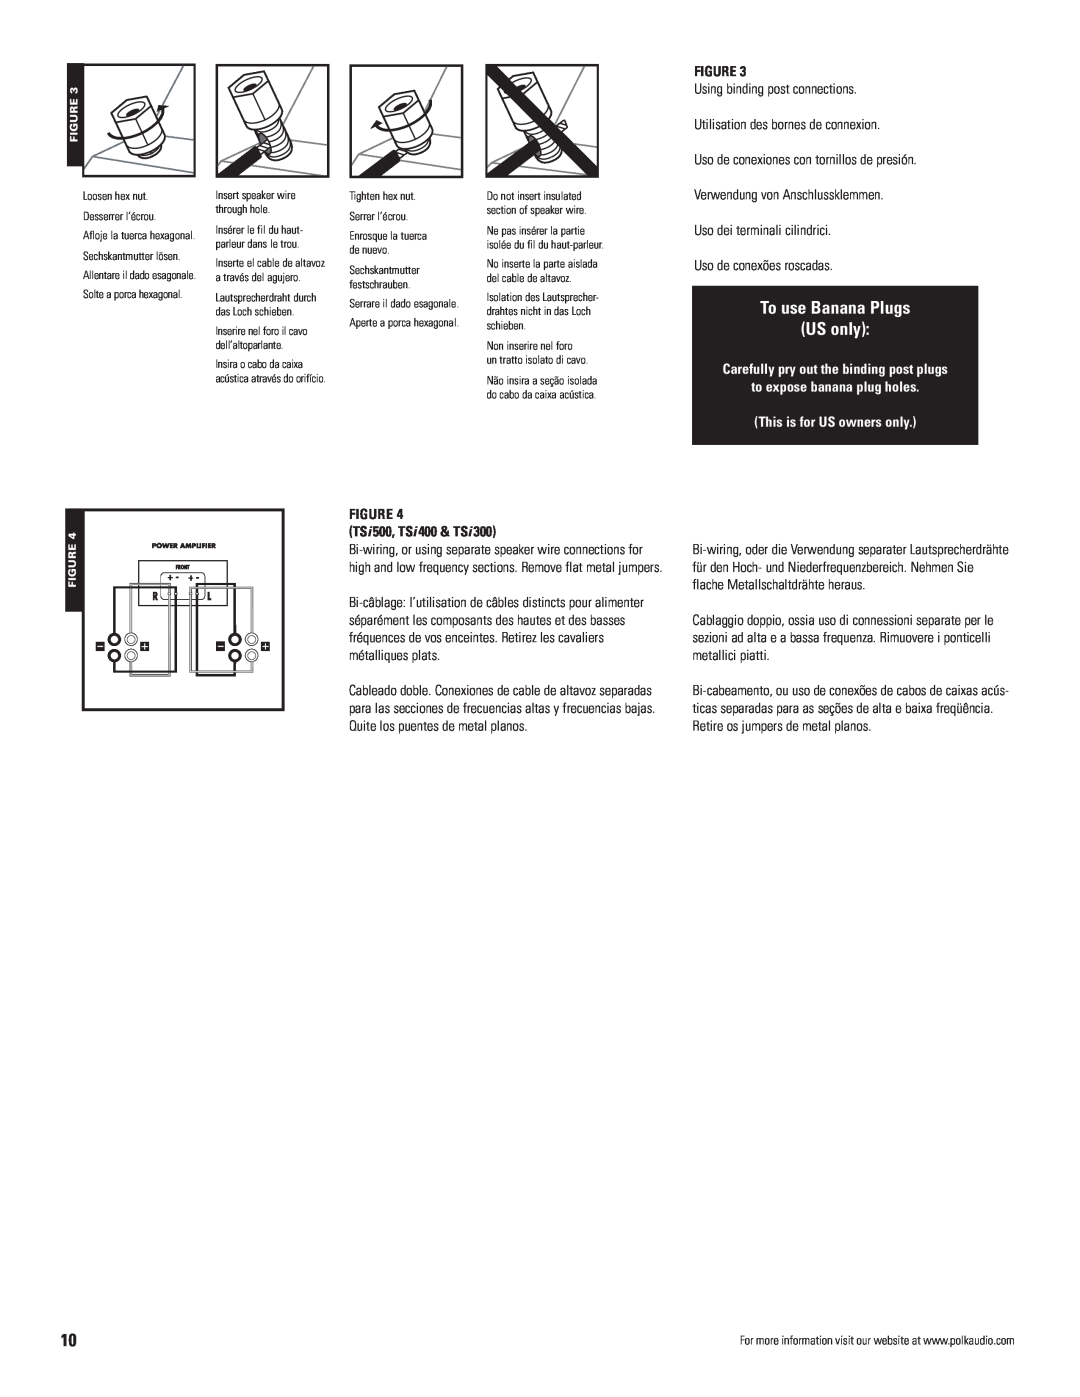 Polk Audio TSi owner manual To use Banana Plugs US only, to expose banana plug holes, This is for US owners only 